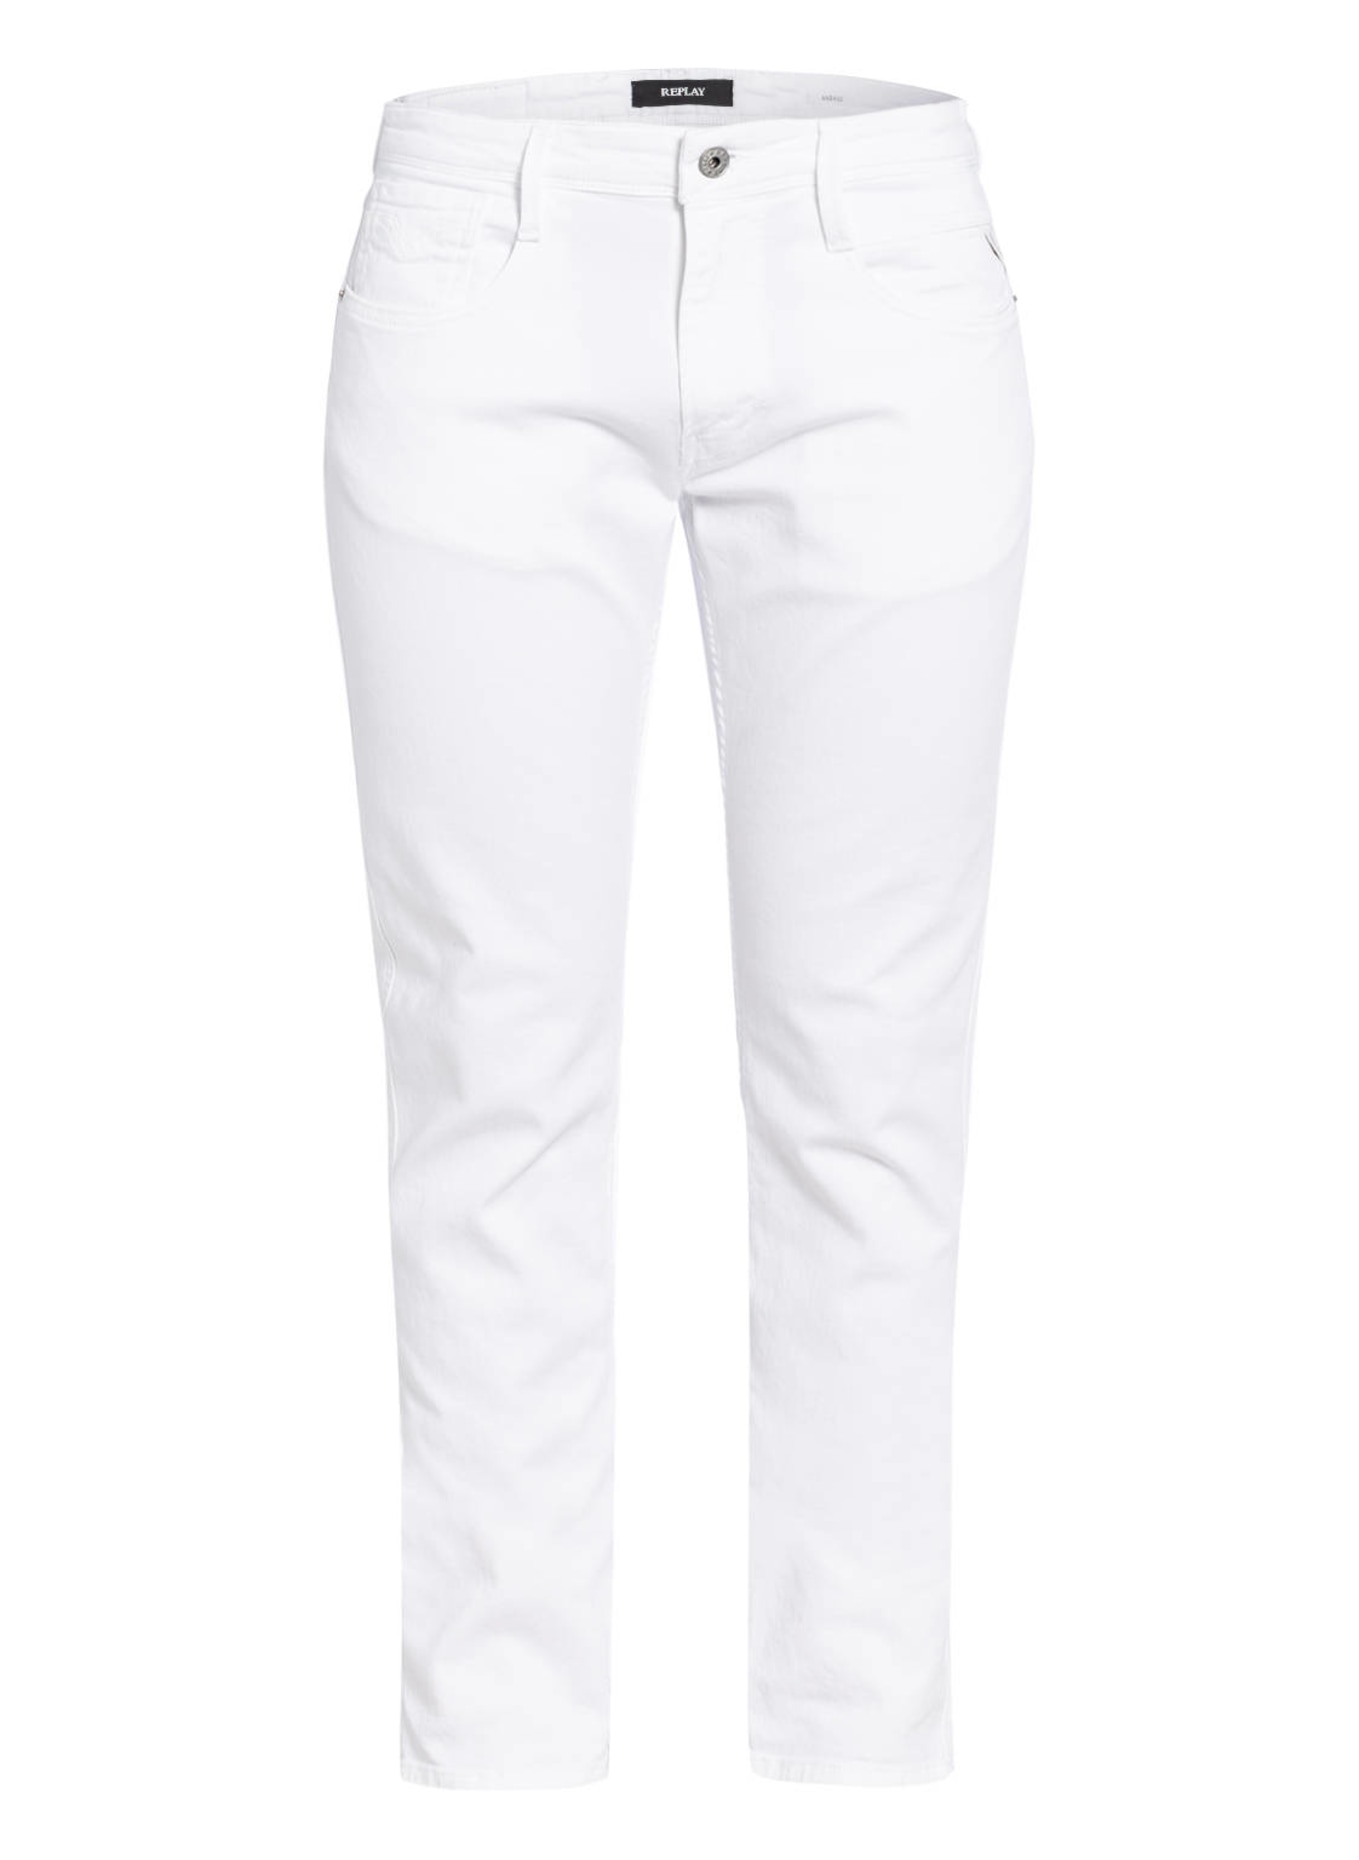 REPLAY Jeans ANBASS Extra Slim Fit, Farbe: 001 WHITE (Bild 1)